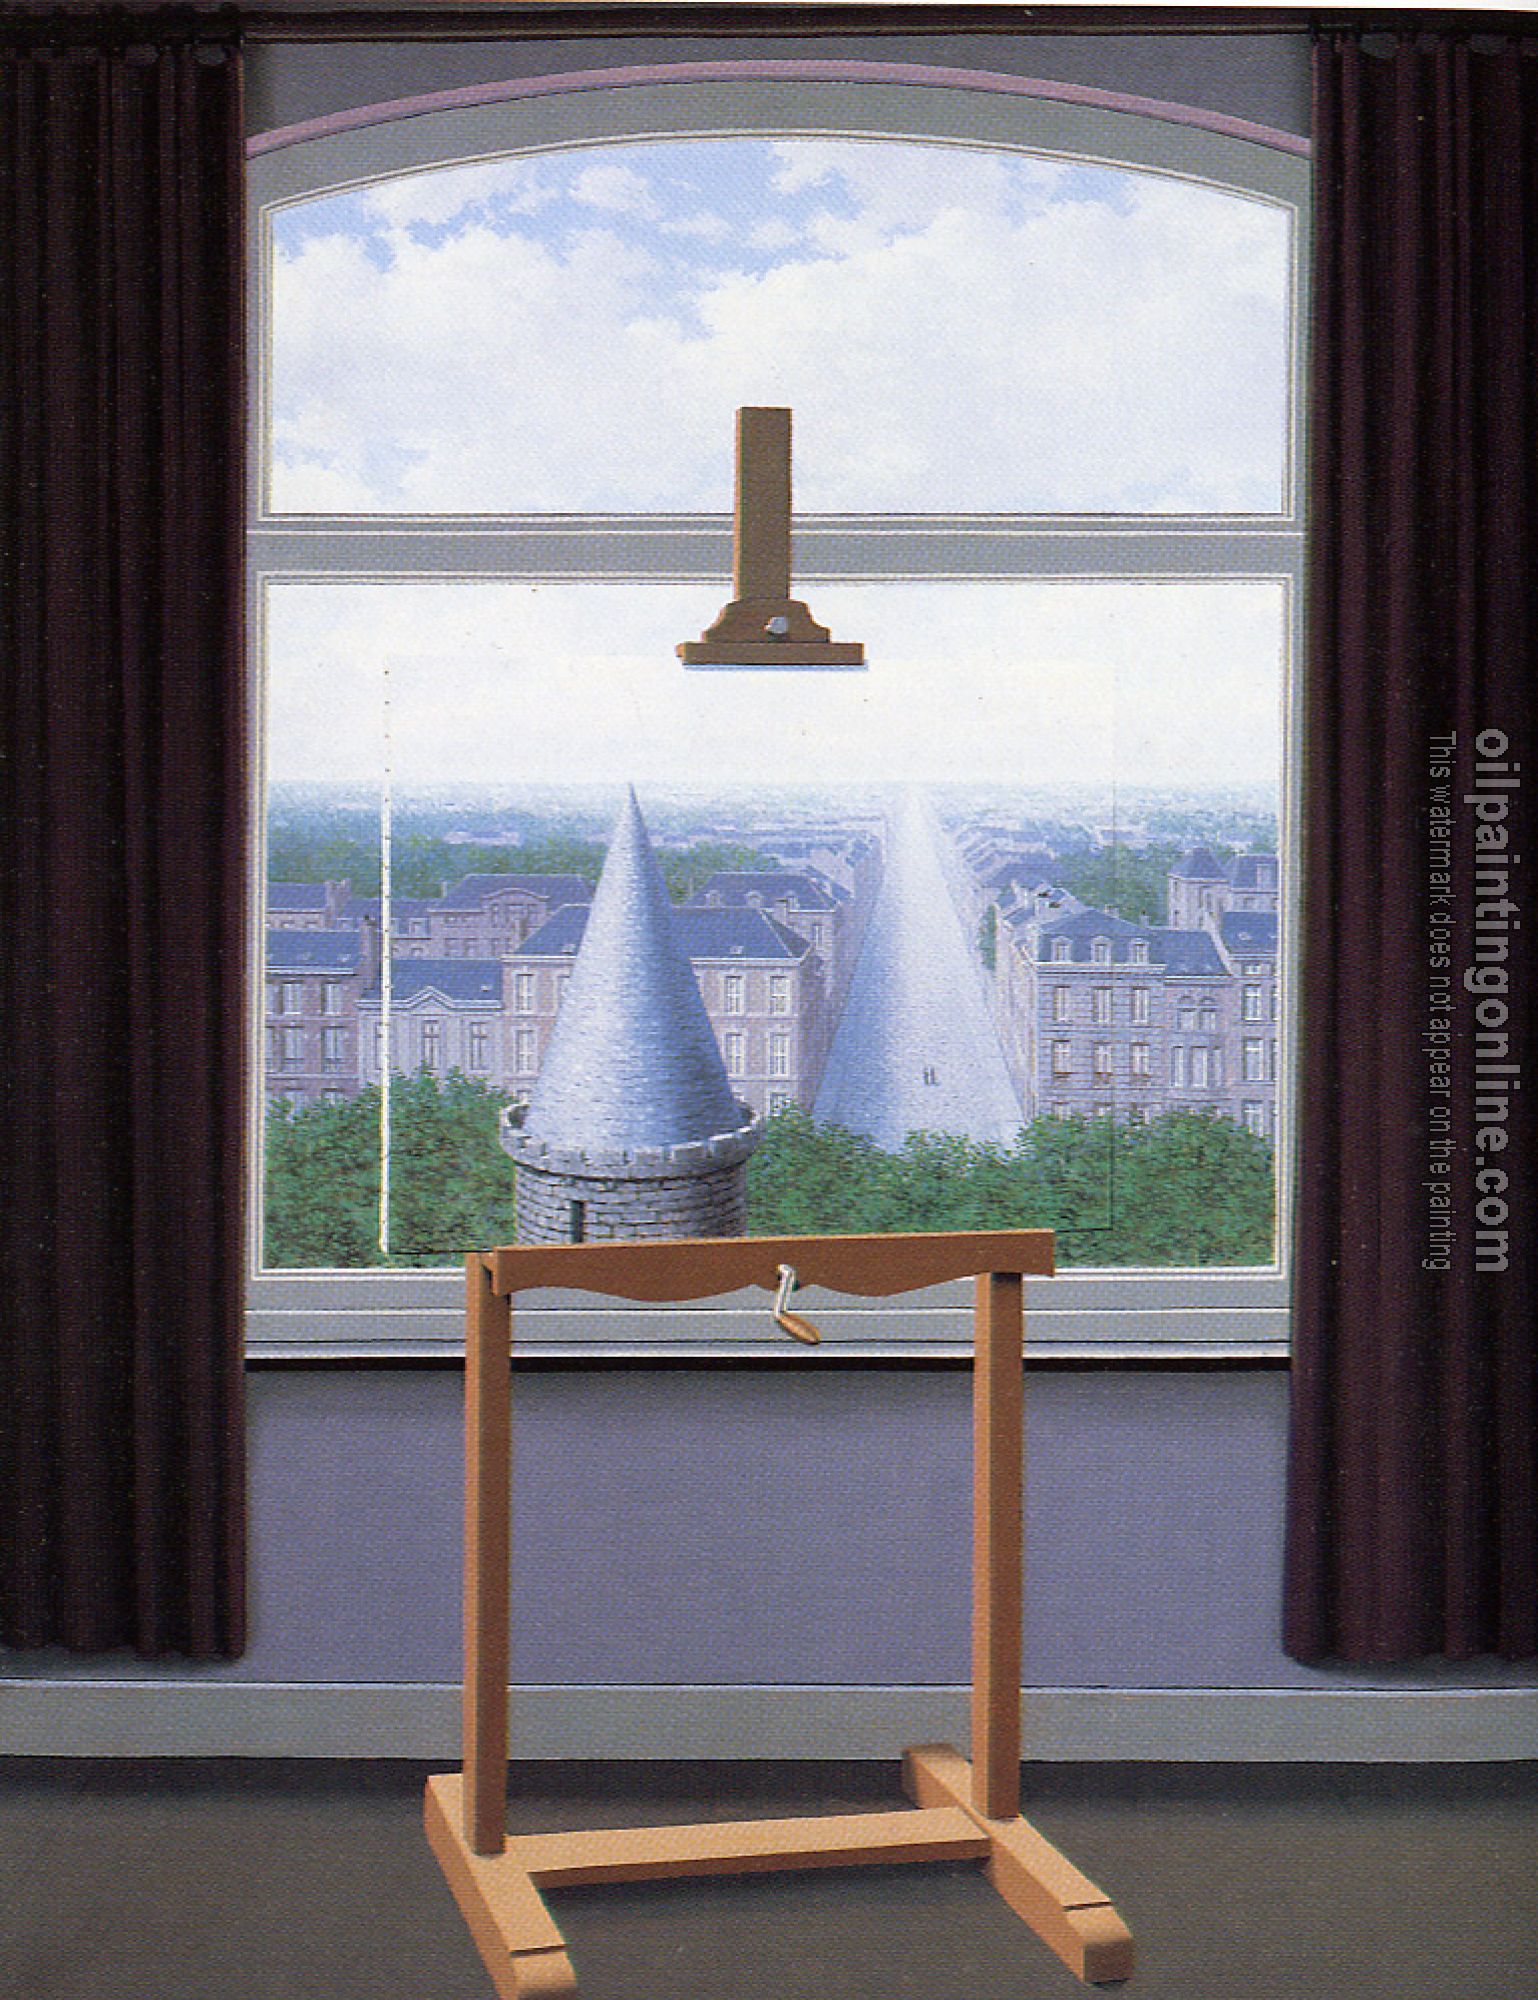 Magritte, Rene - where euclid walked